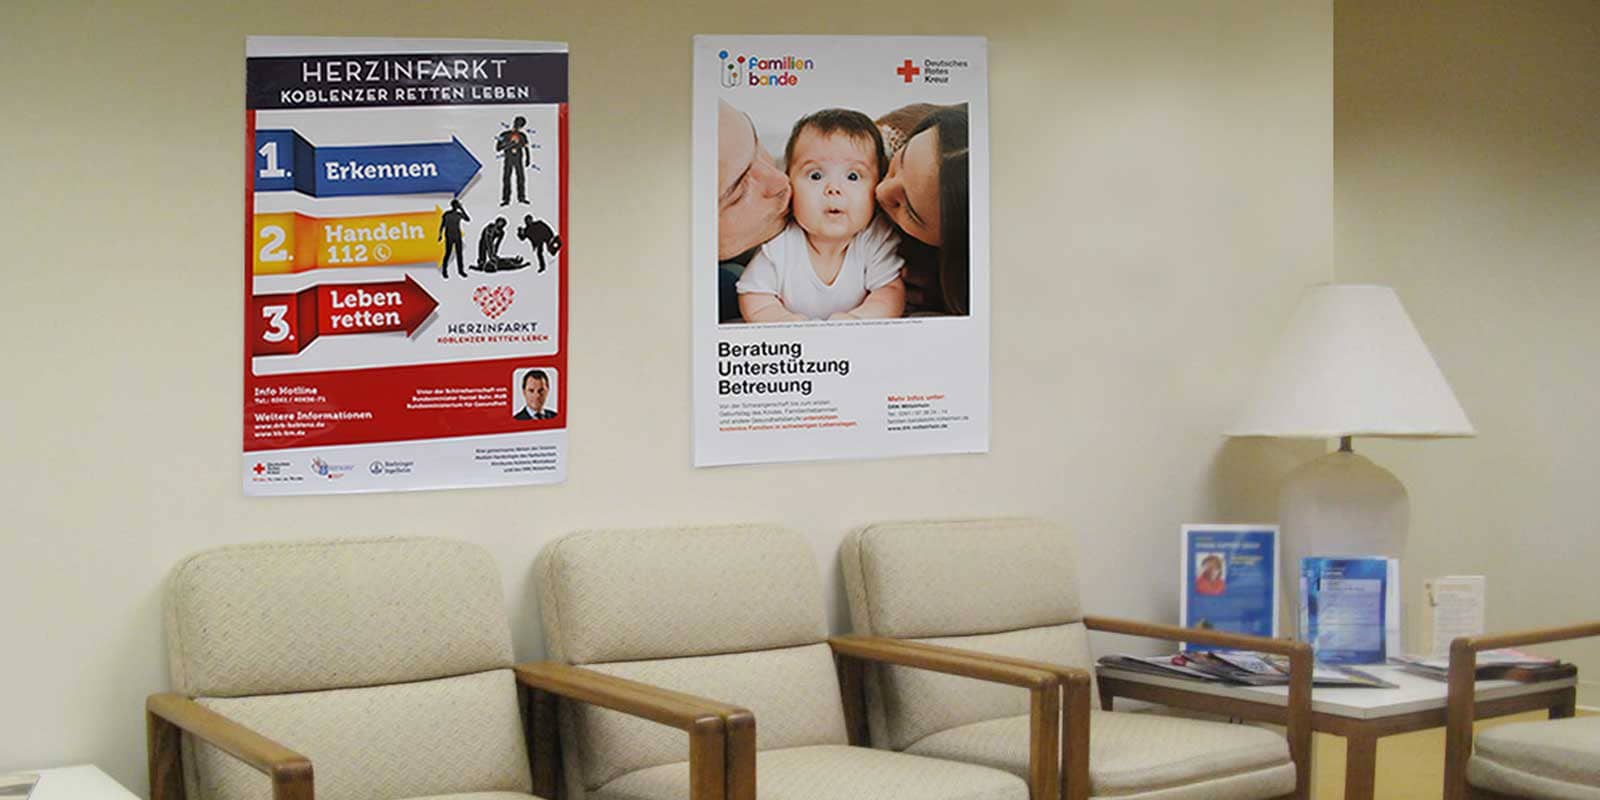 Poster in doctor's office waiting room for heart attack campaign designed by Kelly Gold